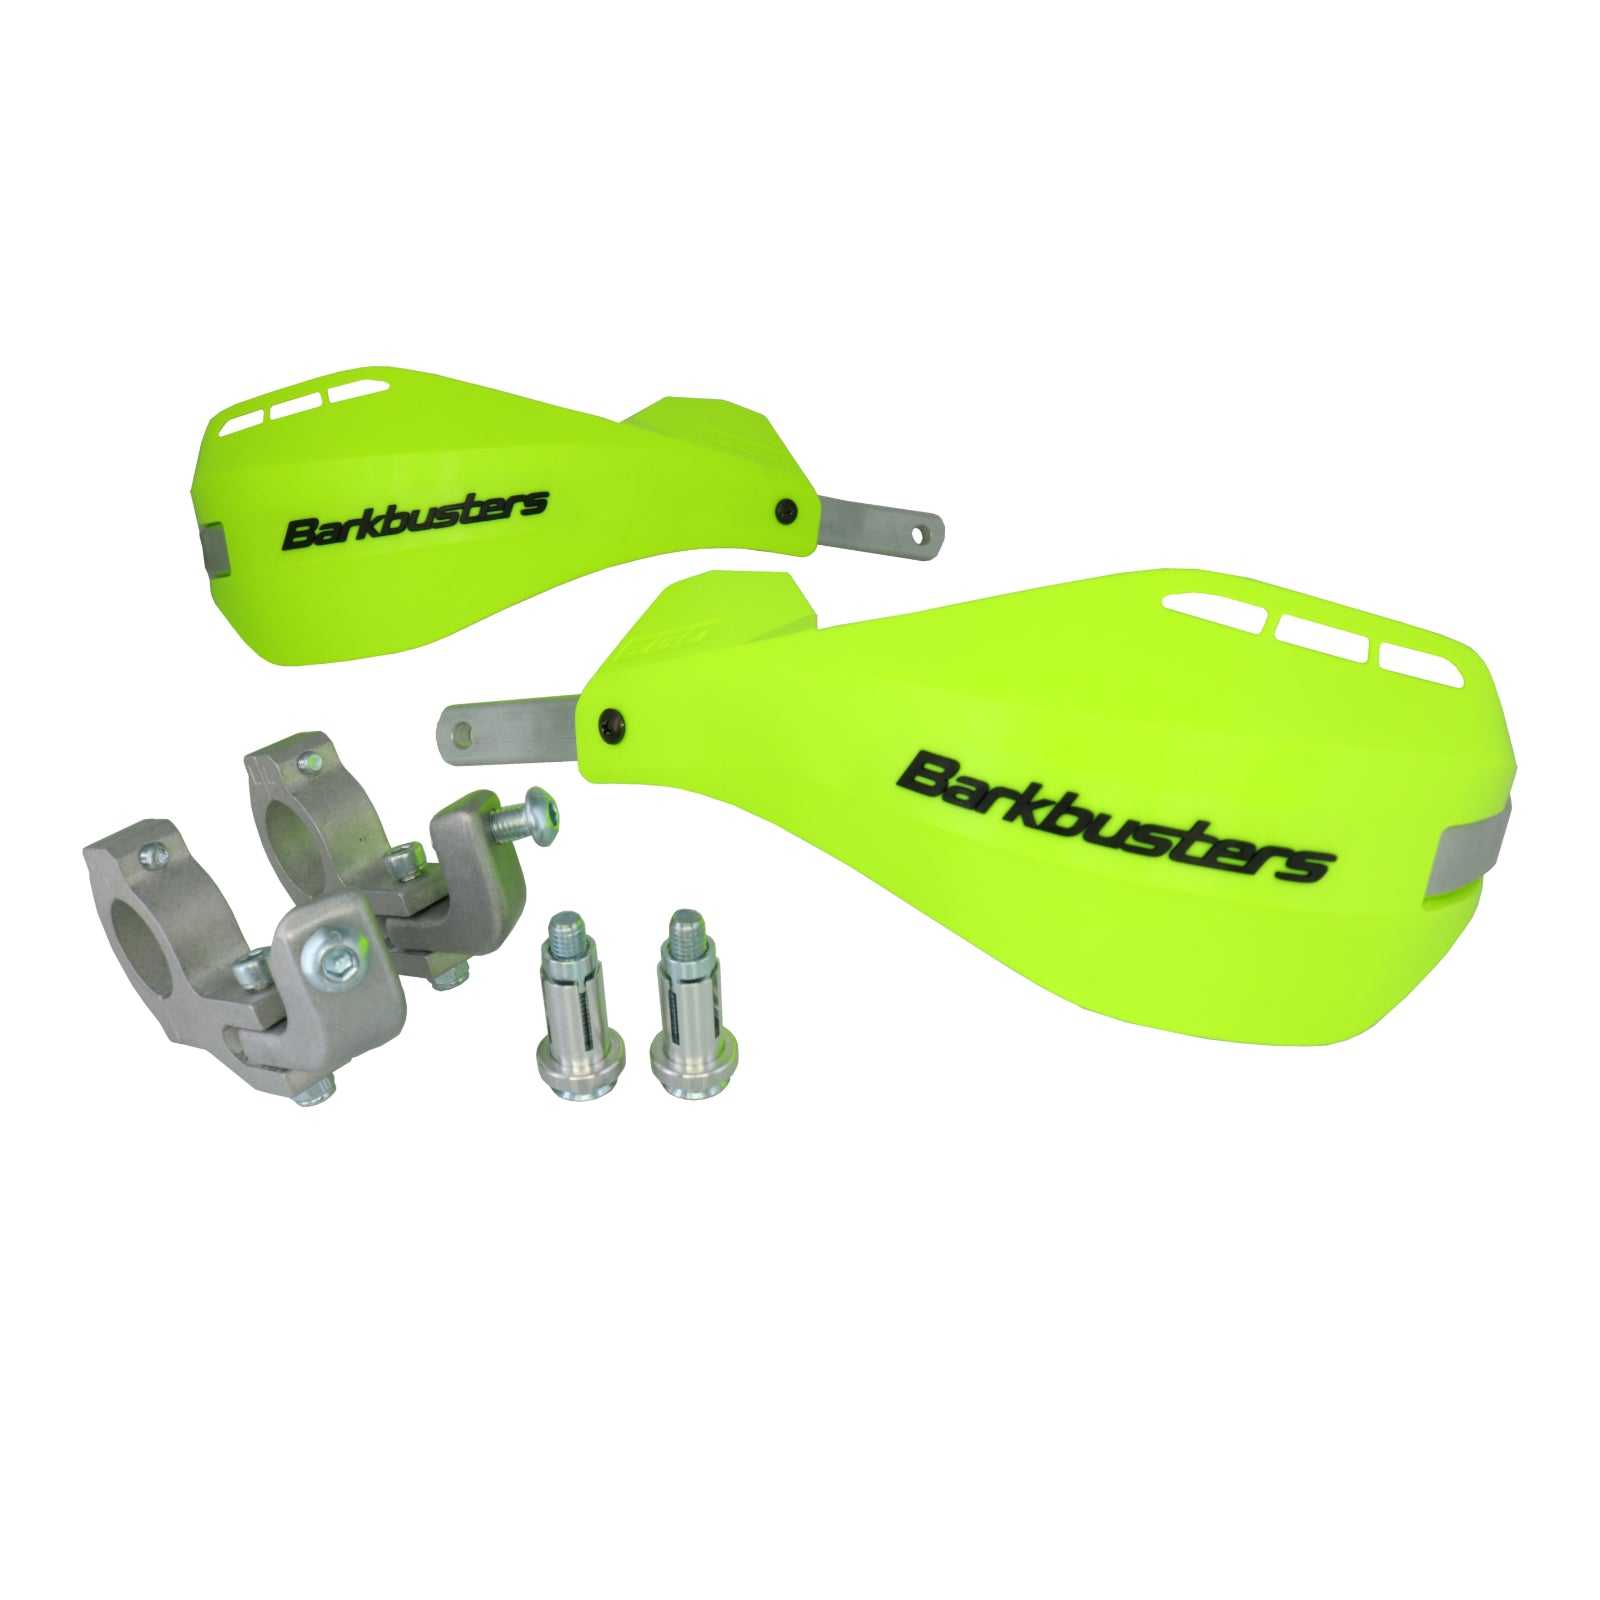 Barkbusters, Barkbusters Ego Handguard  with Multi Fit Clamps - Hi-Vis